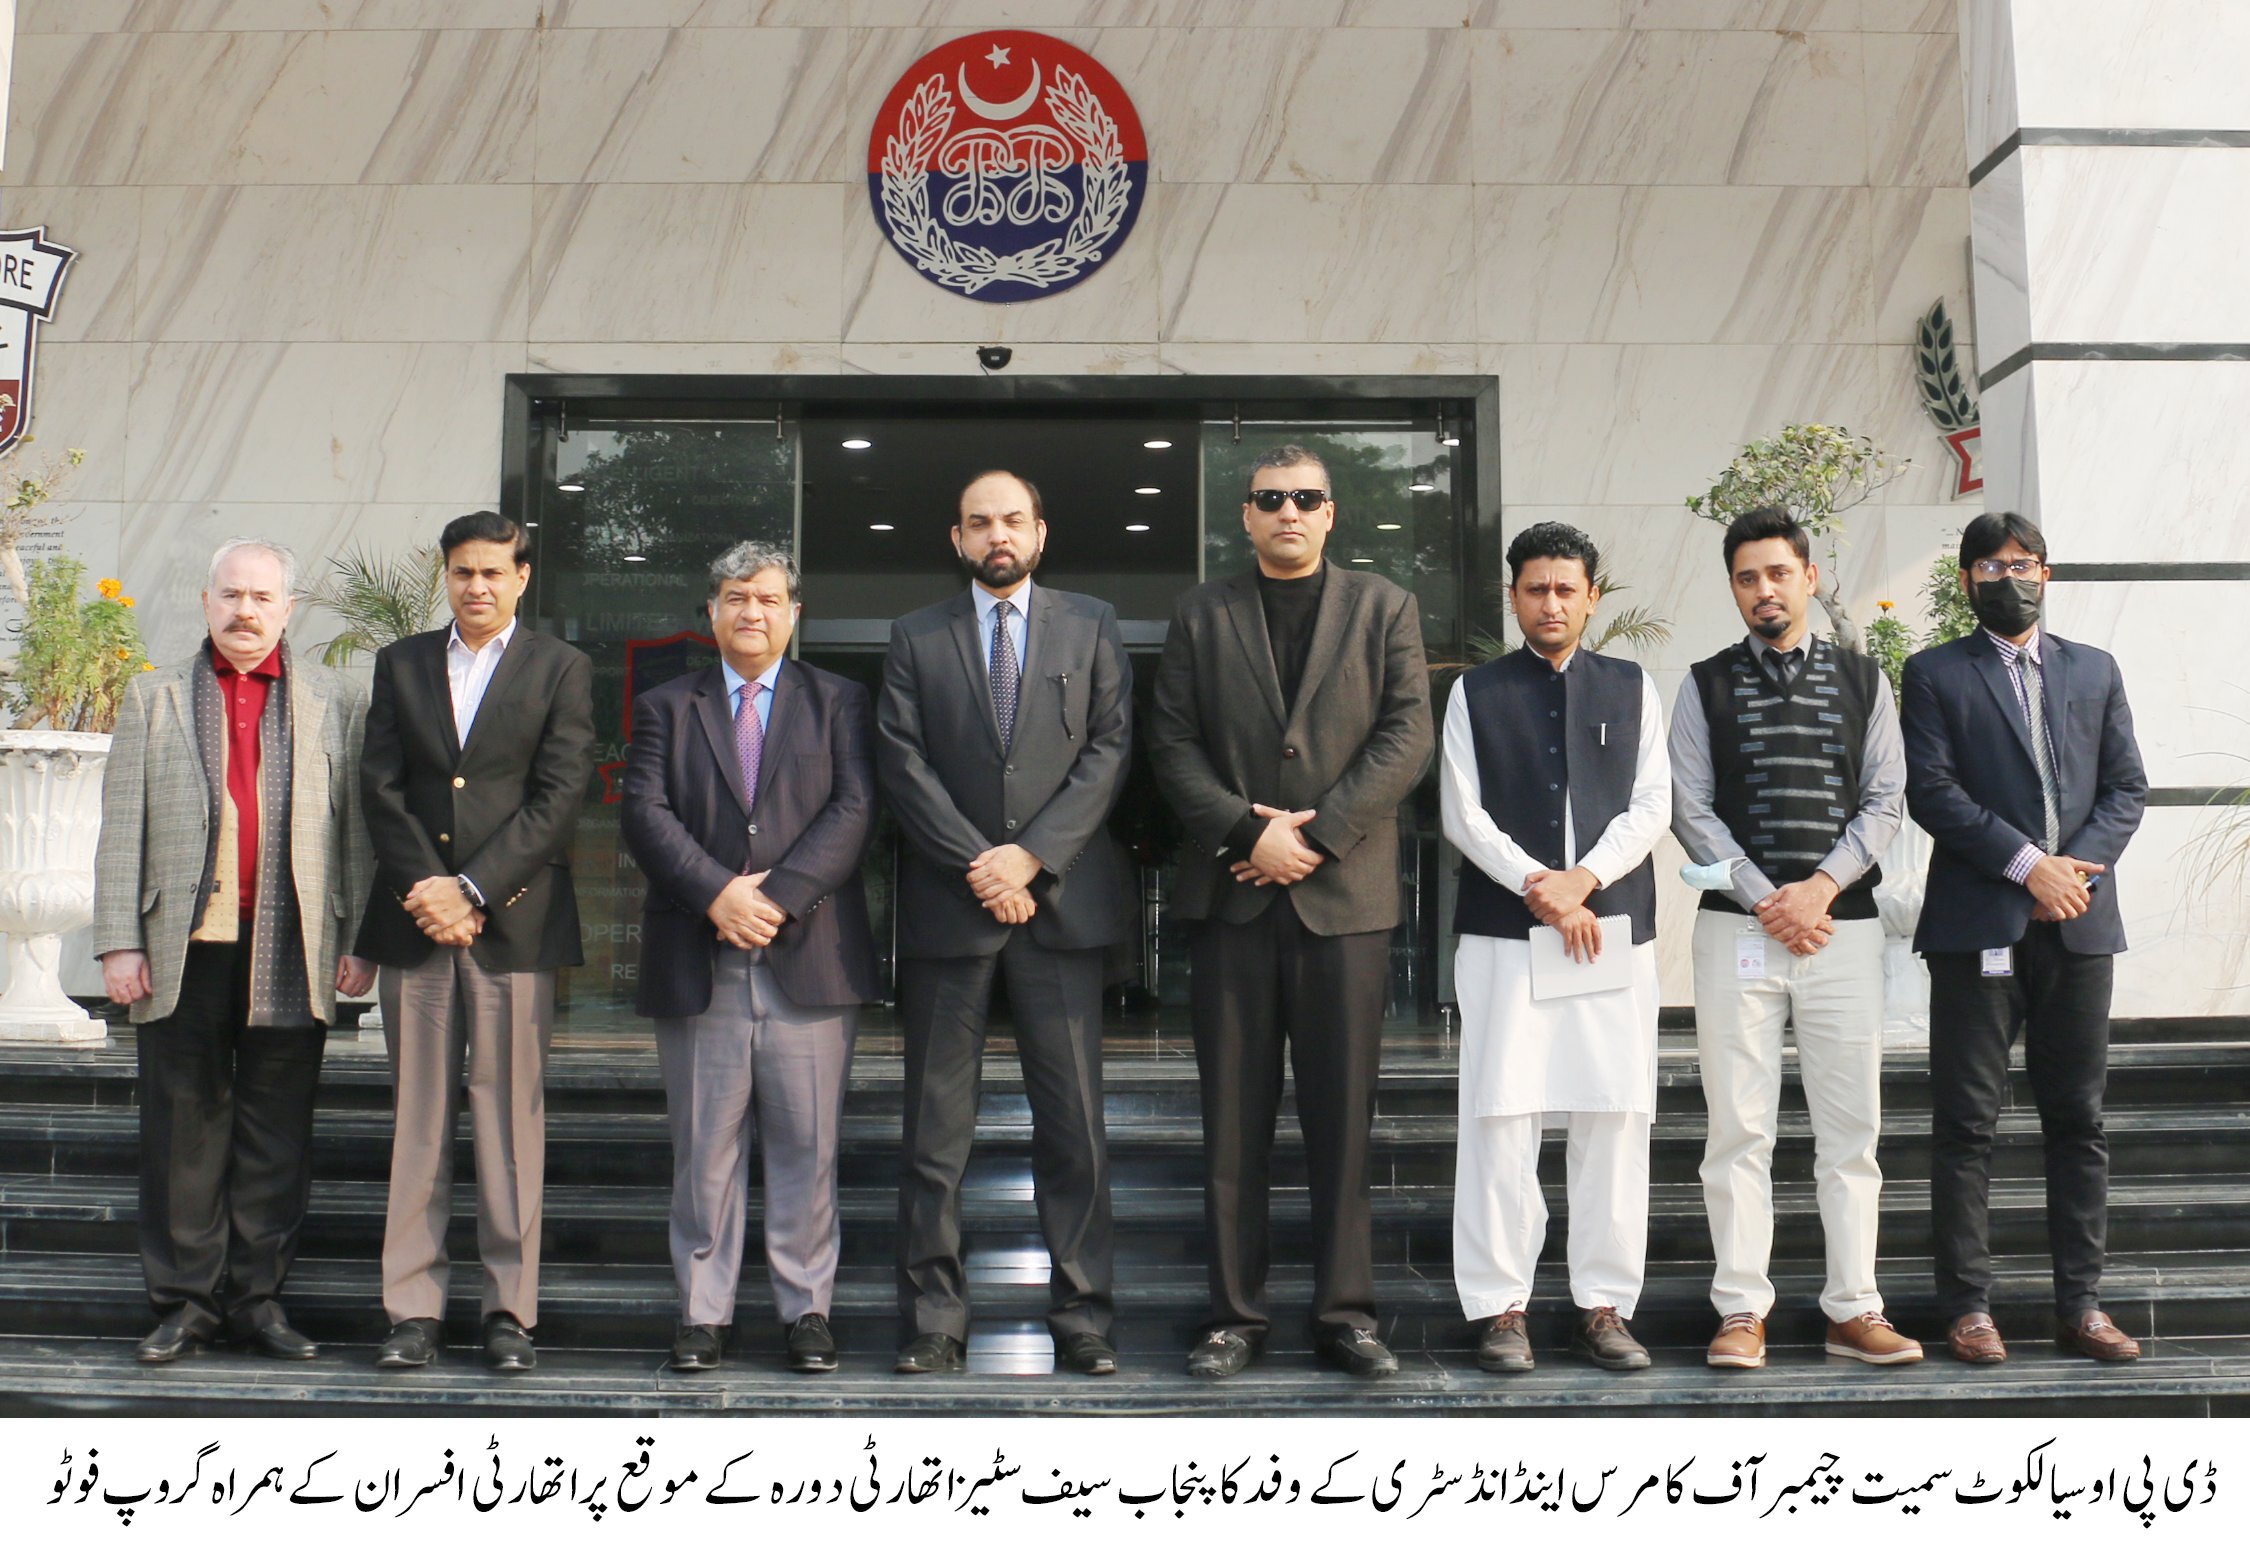 A delegation of the Sialkot Chamber of Commerce & Industry led by Mian Imran Akbar, President SCCI visited the Punjab Safe Cities Authority (PSCA) on December 22, 2021. Mian Imran Akbar, President Chamber discussed the matters related to launching of the Punjab safe city project in Sialkot. Mr. Zohaib Raffique Sethi, Senior Vice President, SCCI, Mr. Umar Saeed Malik, DPO Sialkot and Mr. Nasir Saleem Mirza also shared their views on this project. Muhammad Kamran Khan, Chief Operating Officer, PSCA assured his full cooperation in this regard.